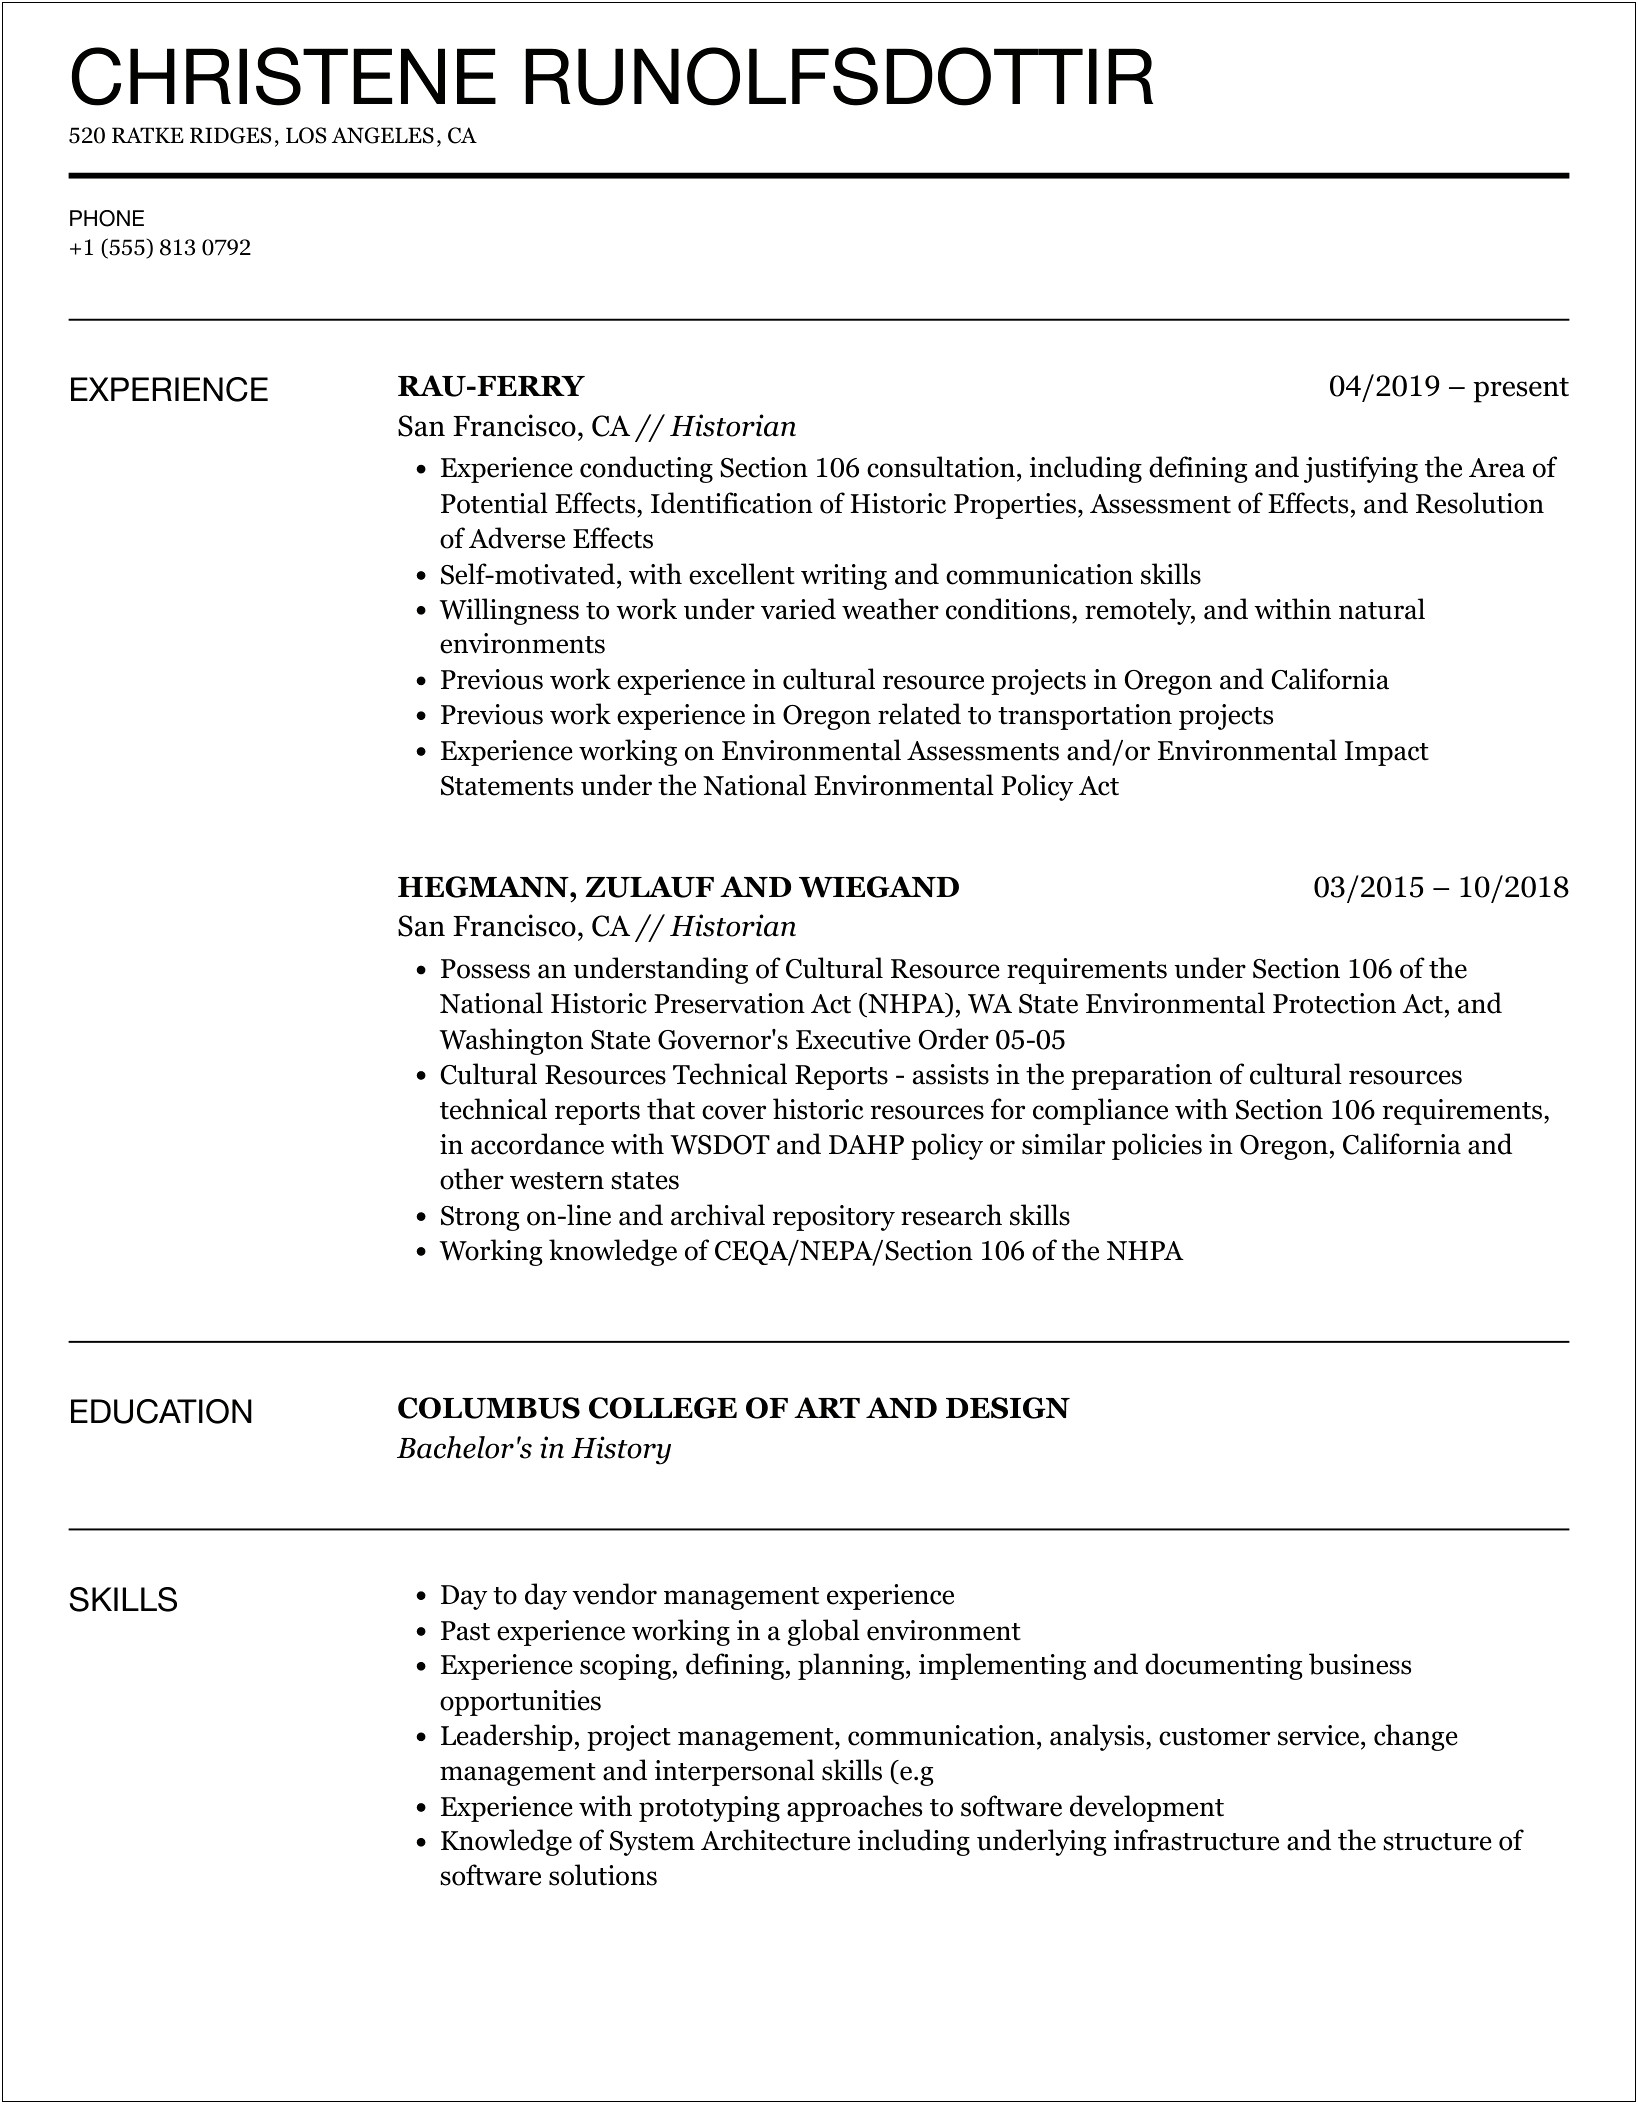 Resume Skills For History With Serving